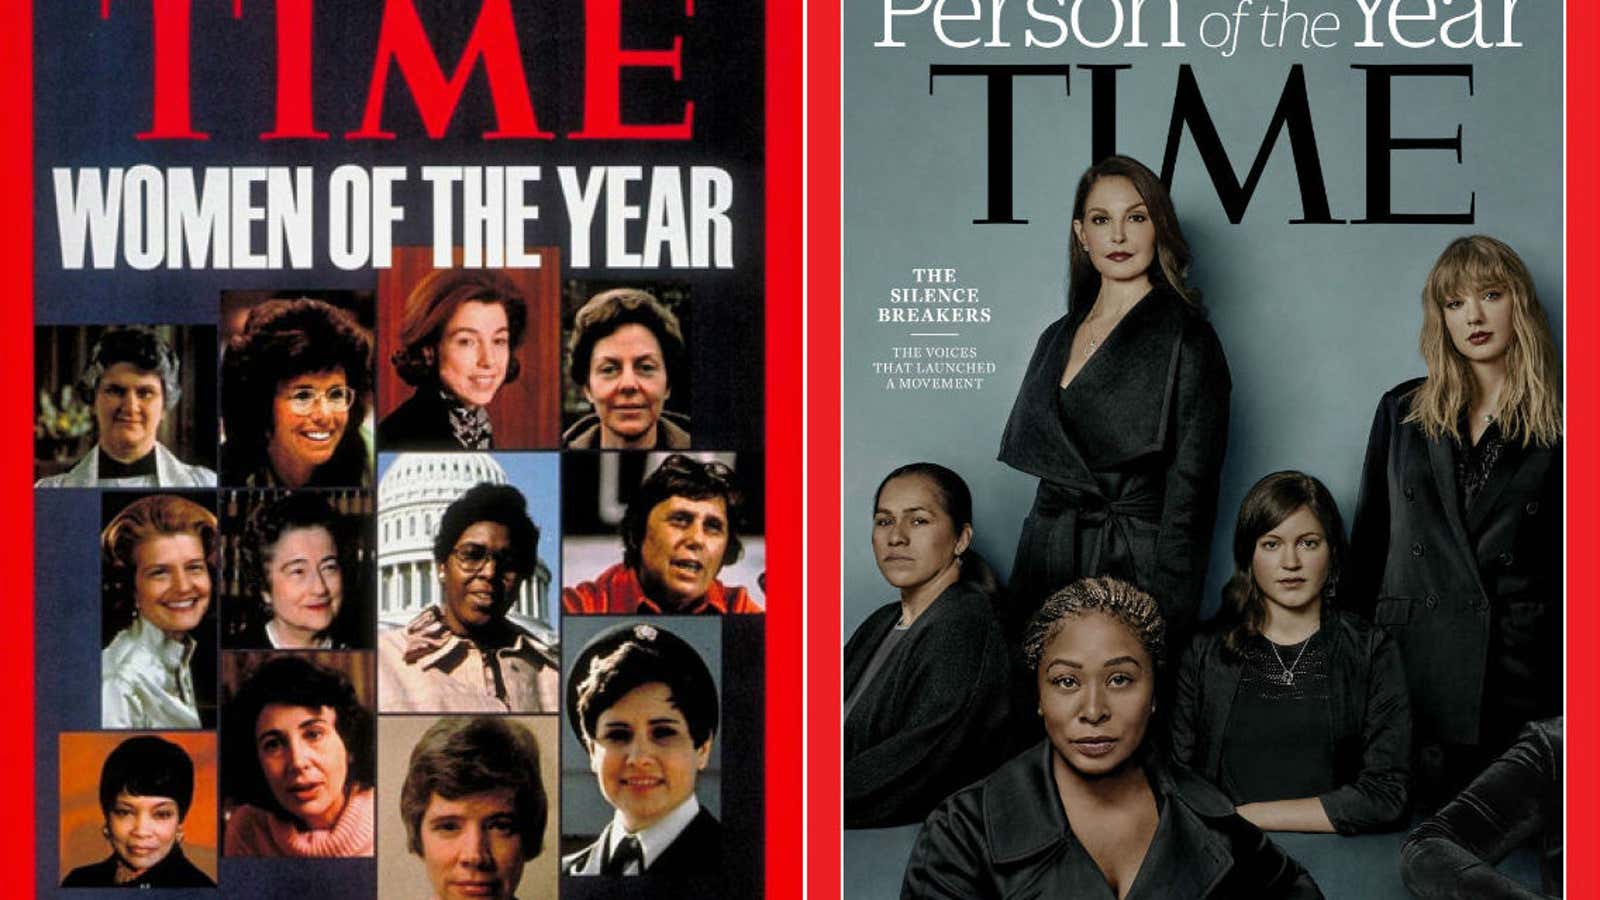 Women of the year 1975. Persons of the year 2017.